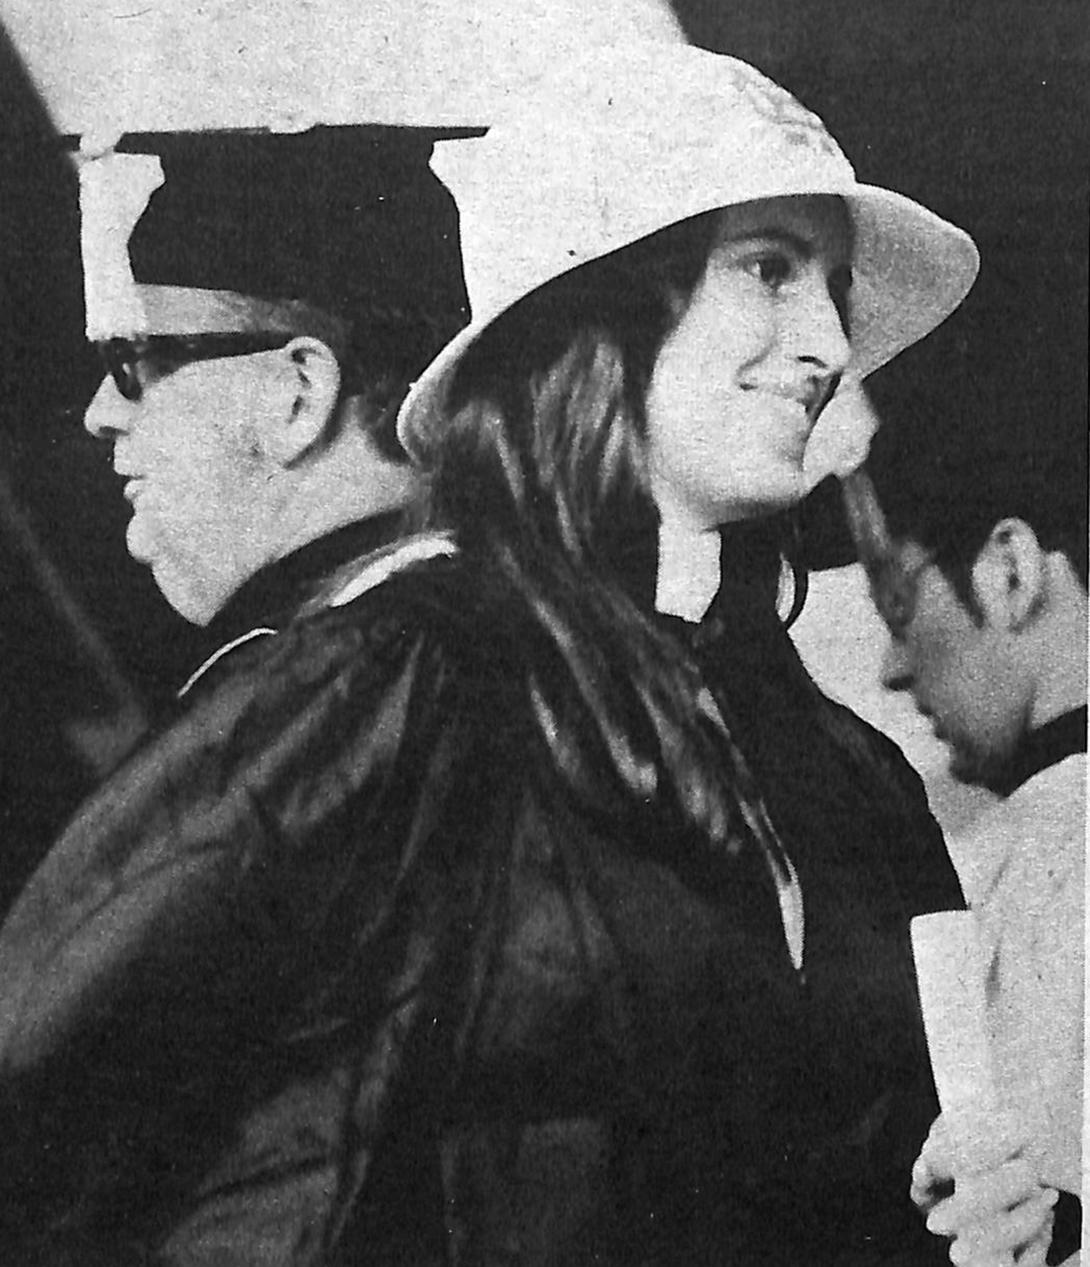 Joanne C. Bell ’74 becomes the first woman to graduate from Holy Cross as she receives her diploma from Fr. Brooks on May 31, 1974